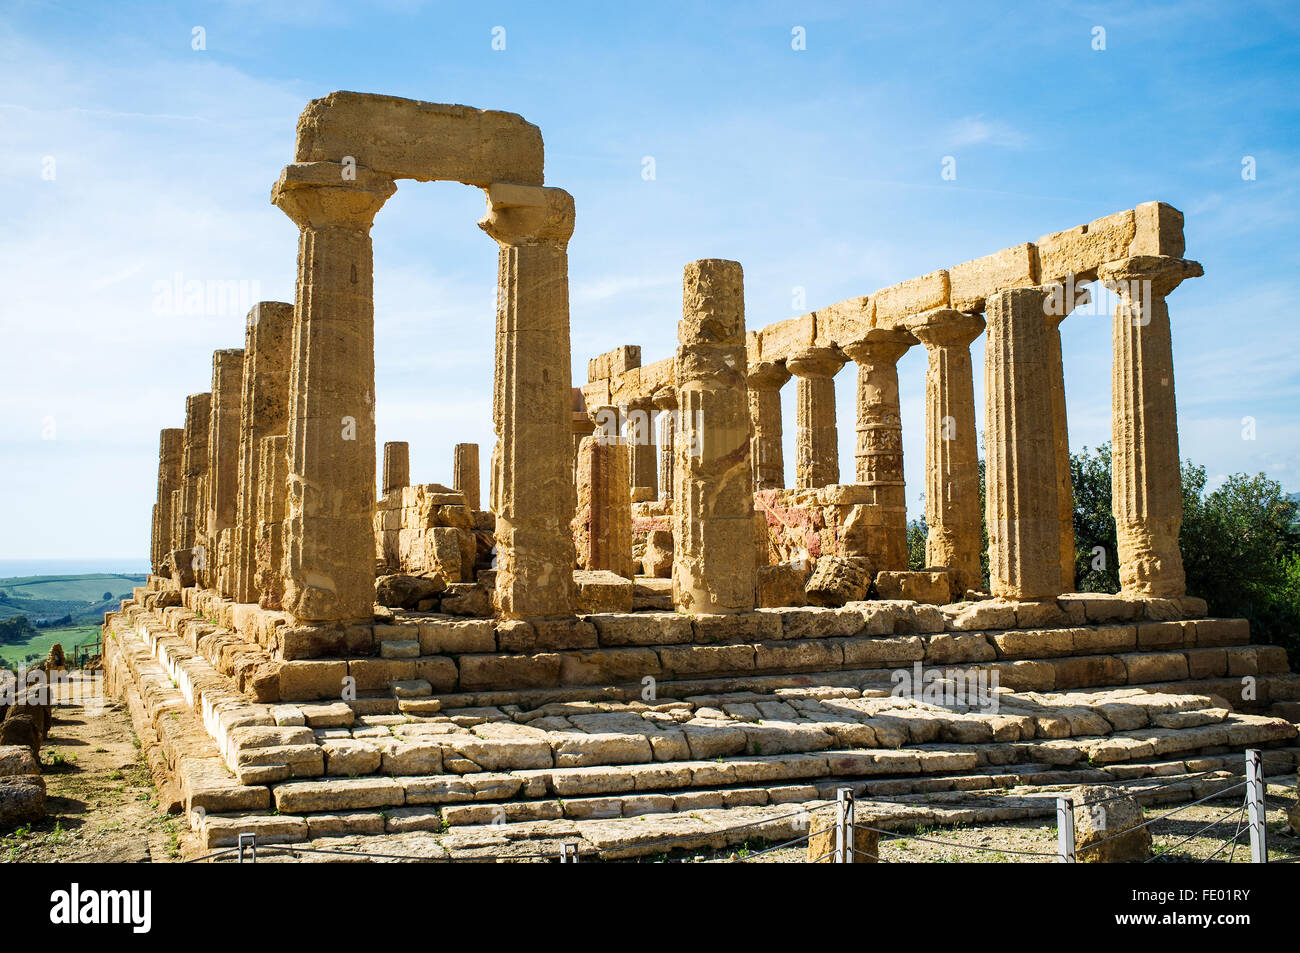 Remains of the Temple of Juno, Agrigento, ancient Greek city of Akragas, Sicily, Italy Stock Photo